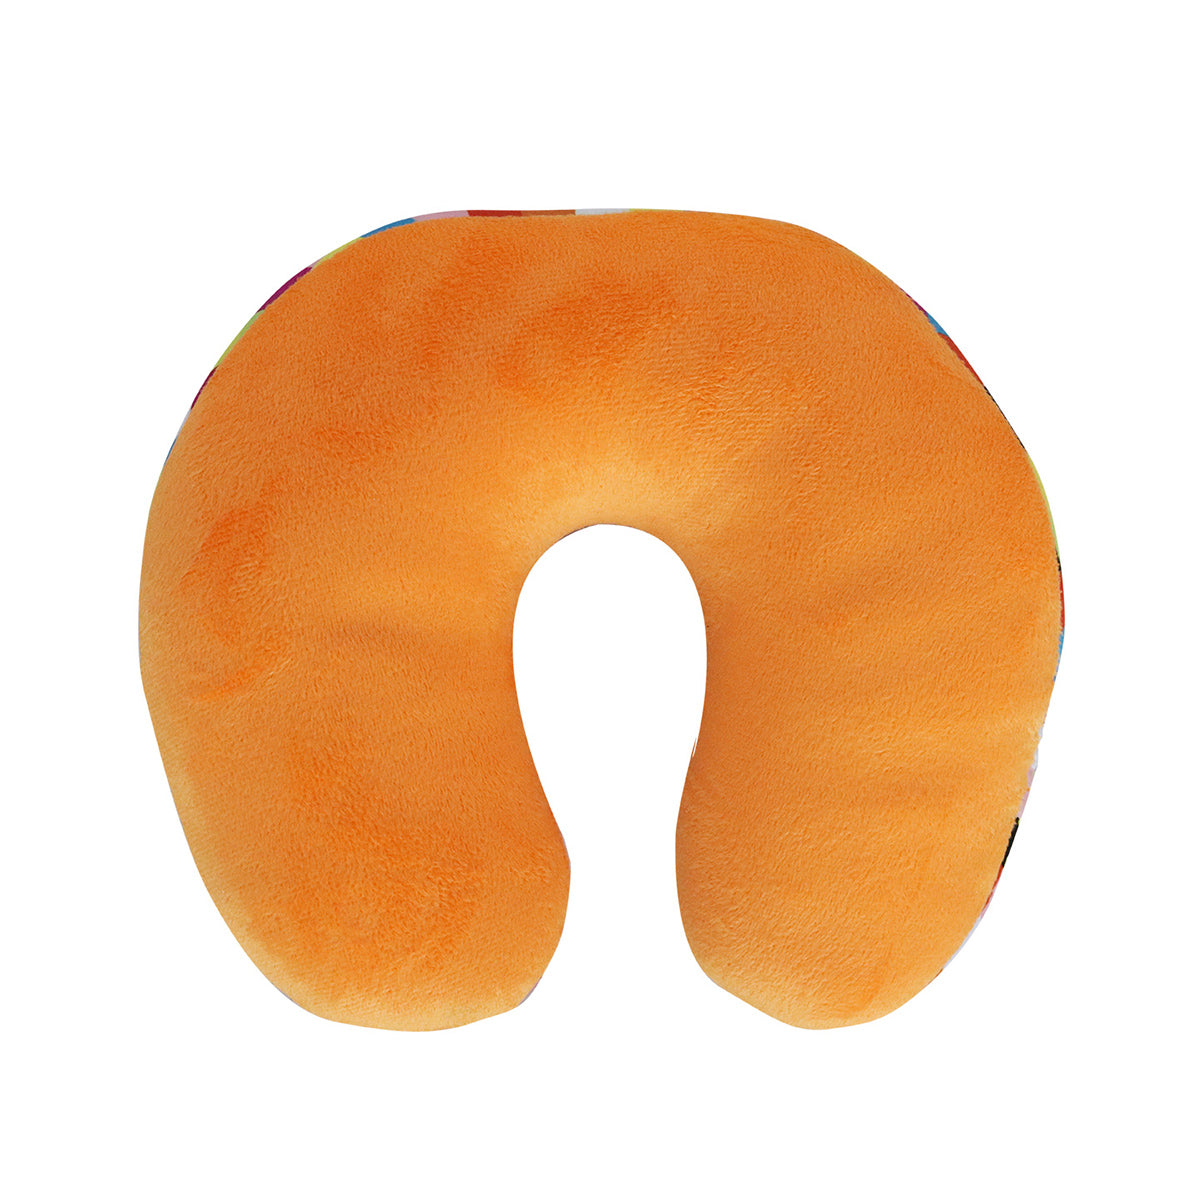 Snuggletime Toddler Microbead Support Neck Cushion